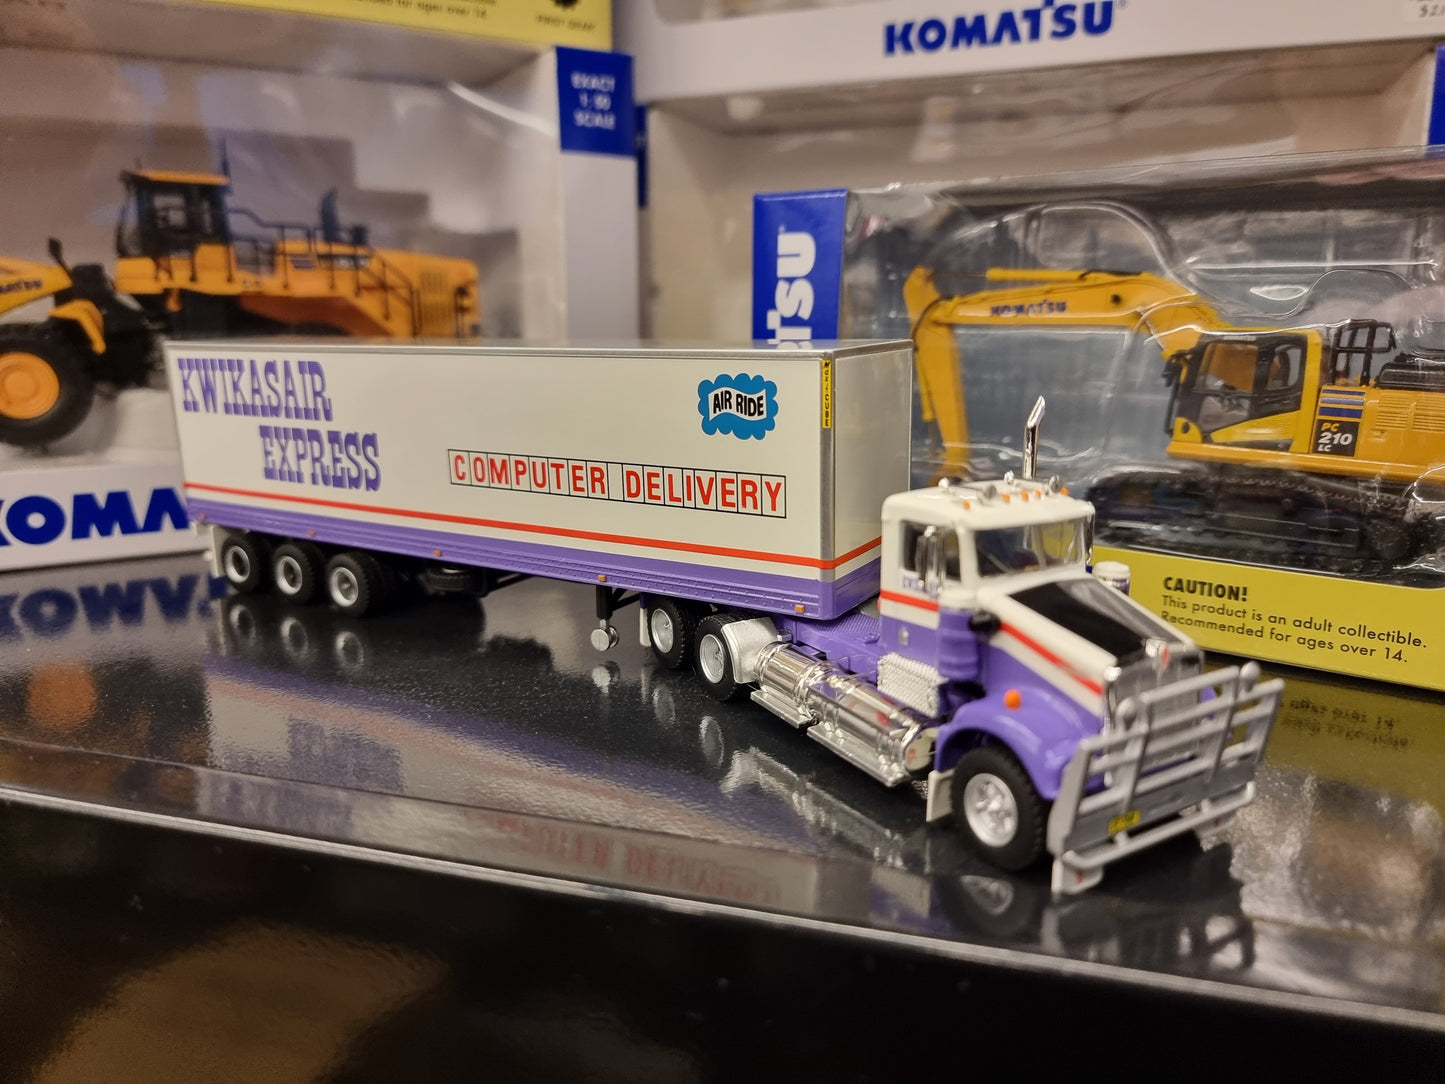 1/64 Kwikasair - prime mover and refrigerated trailer